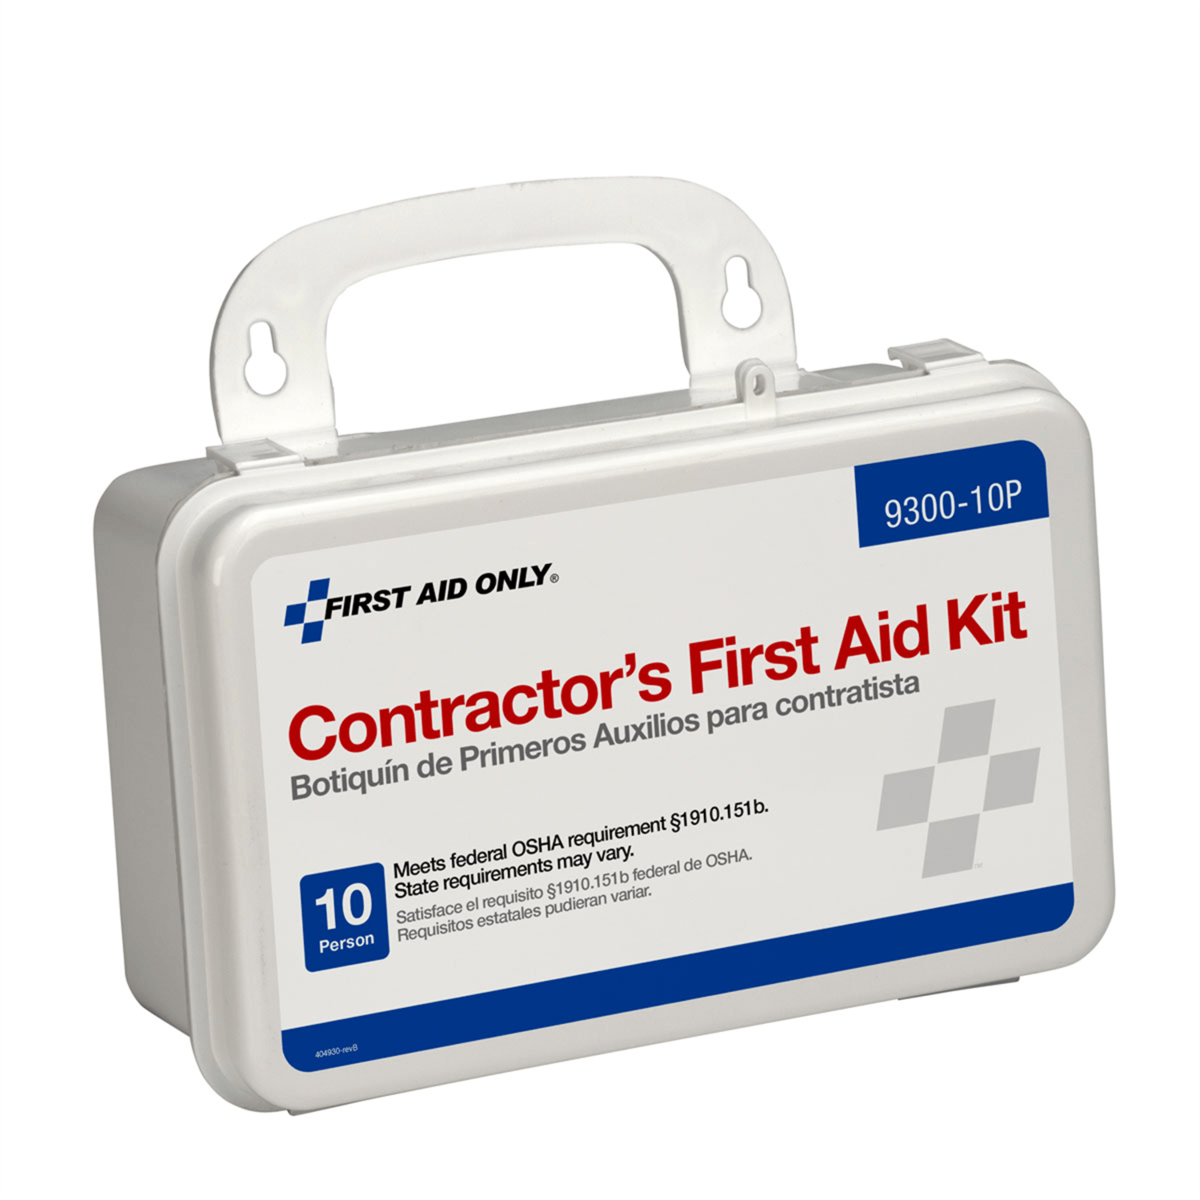 Acme United 10 Person Contractor First Aid Kit, Plastic Case